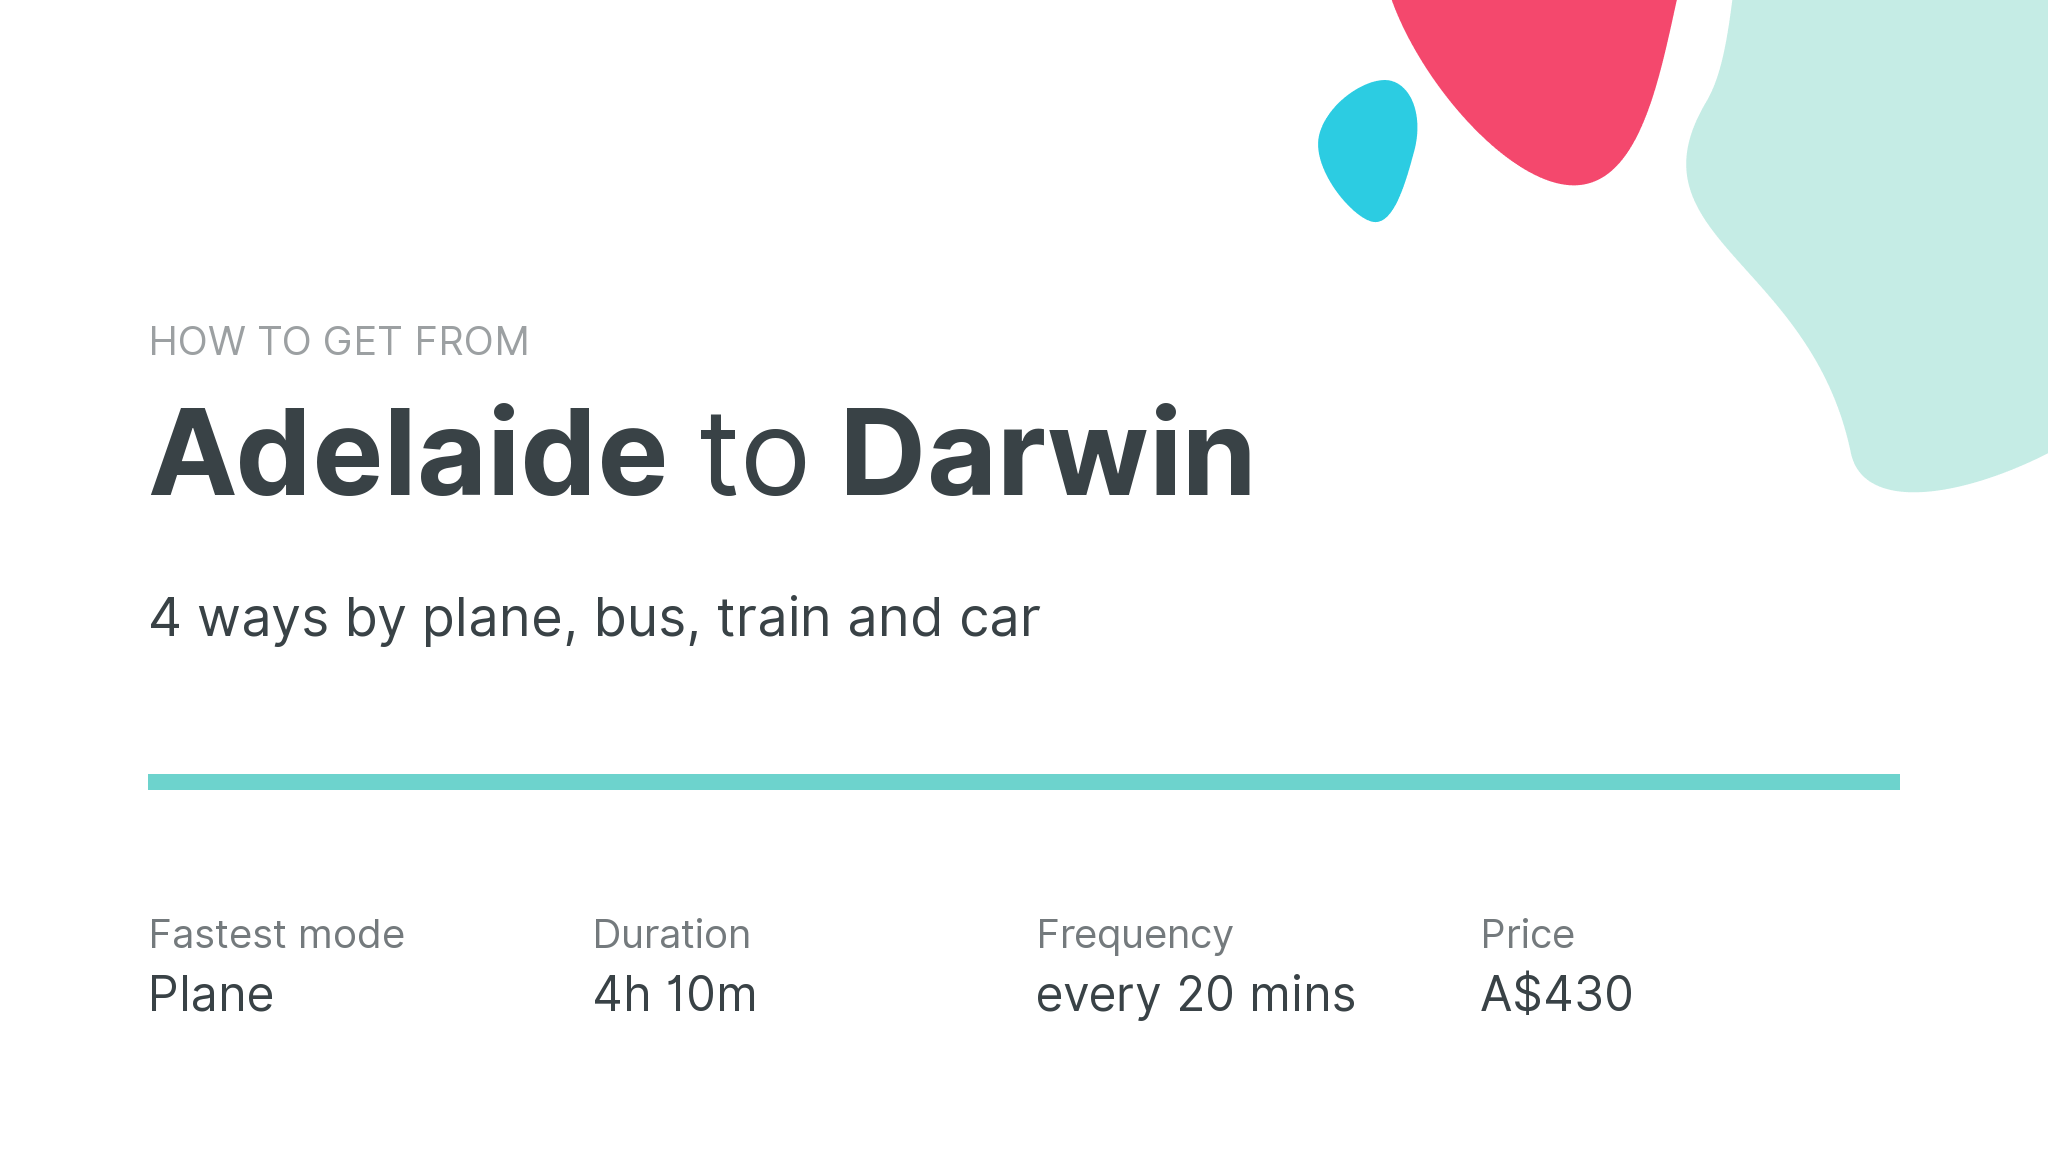 How do I get from Adelaide to Darwin